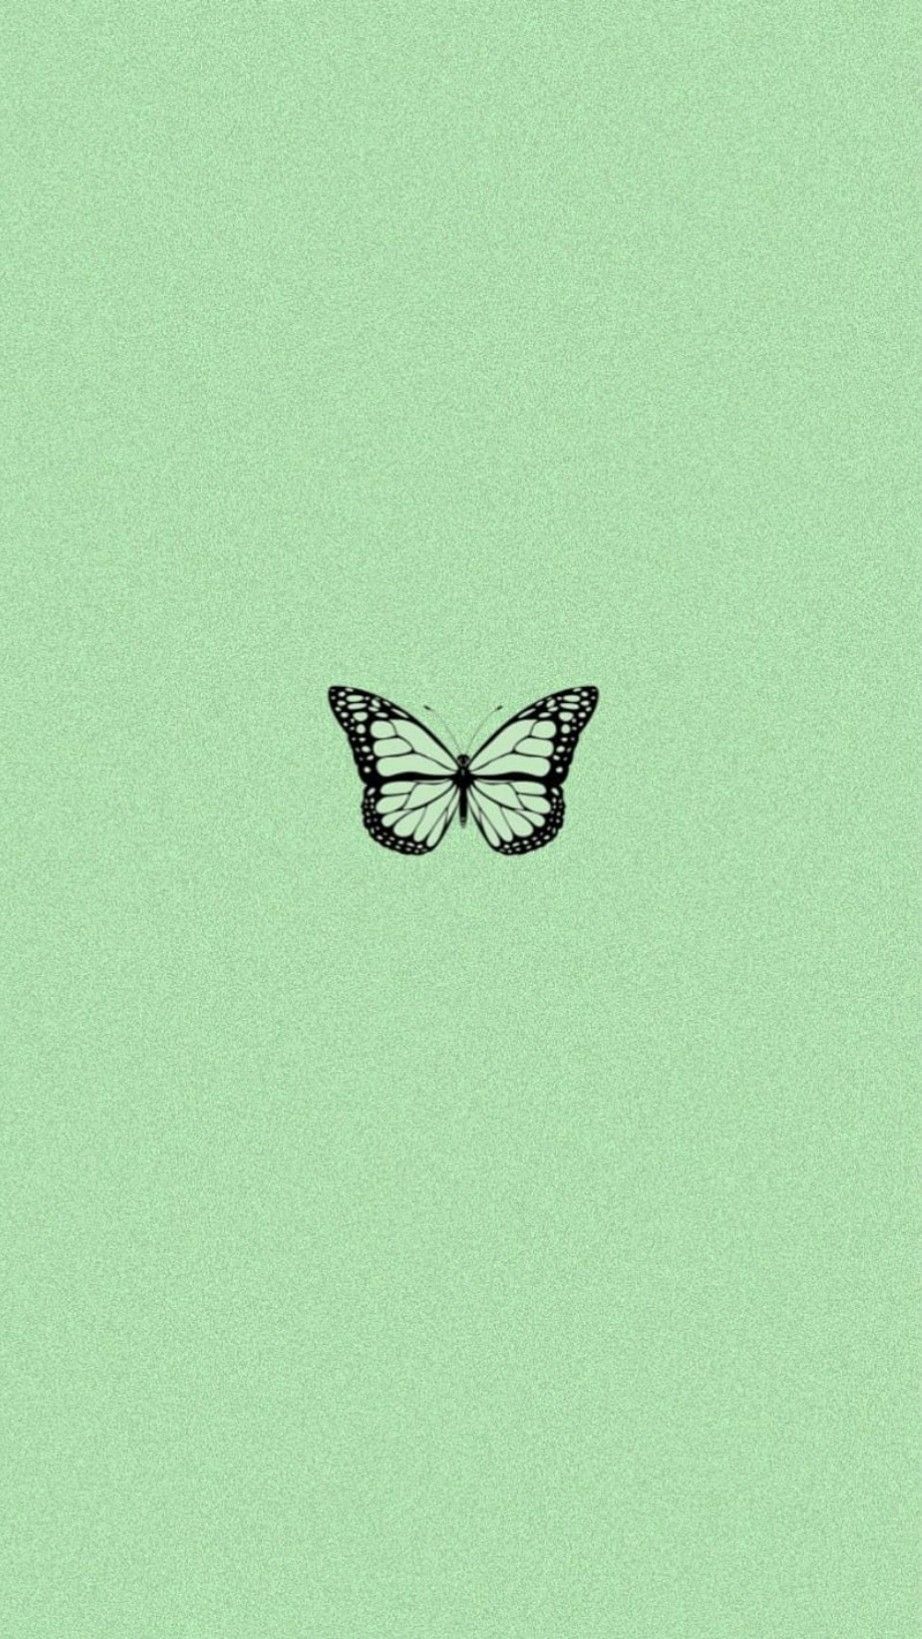 Butterfly on a green background, aesthetic backgrounds, phone background - Pastel green